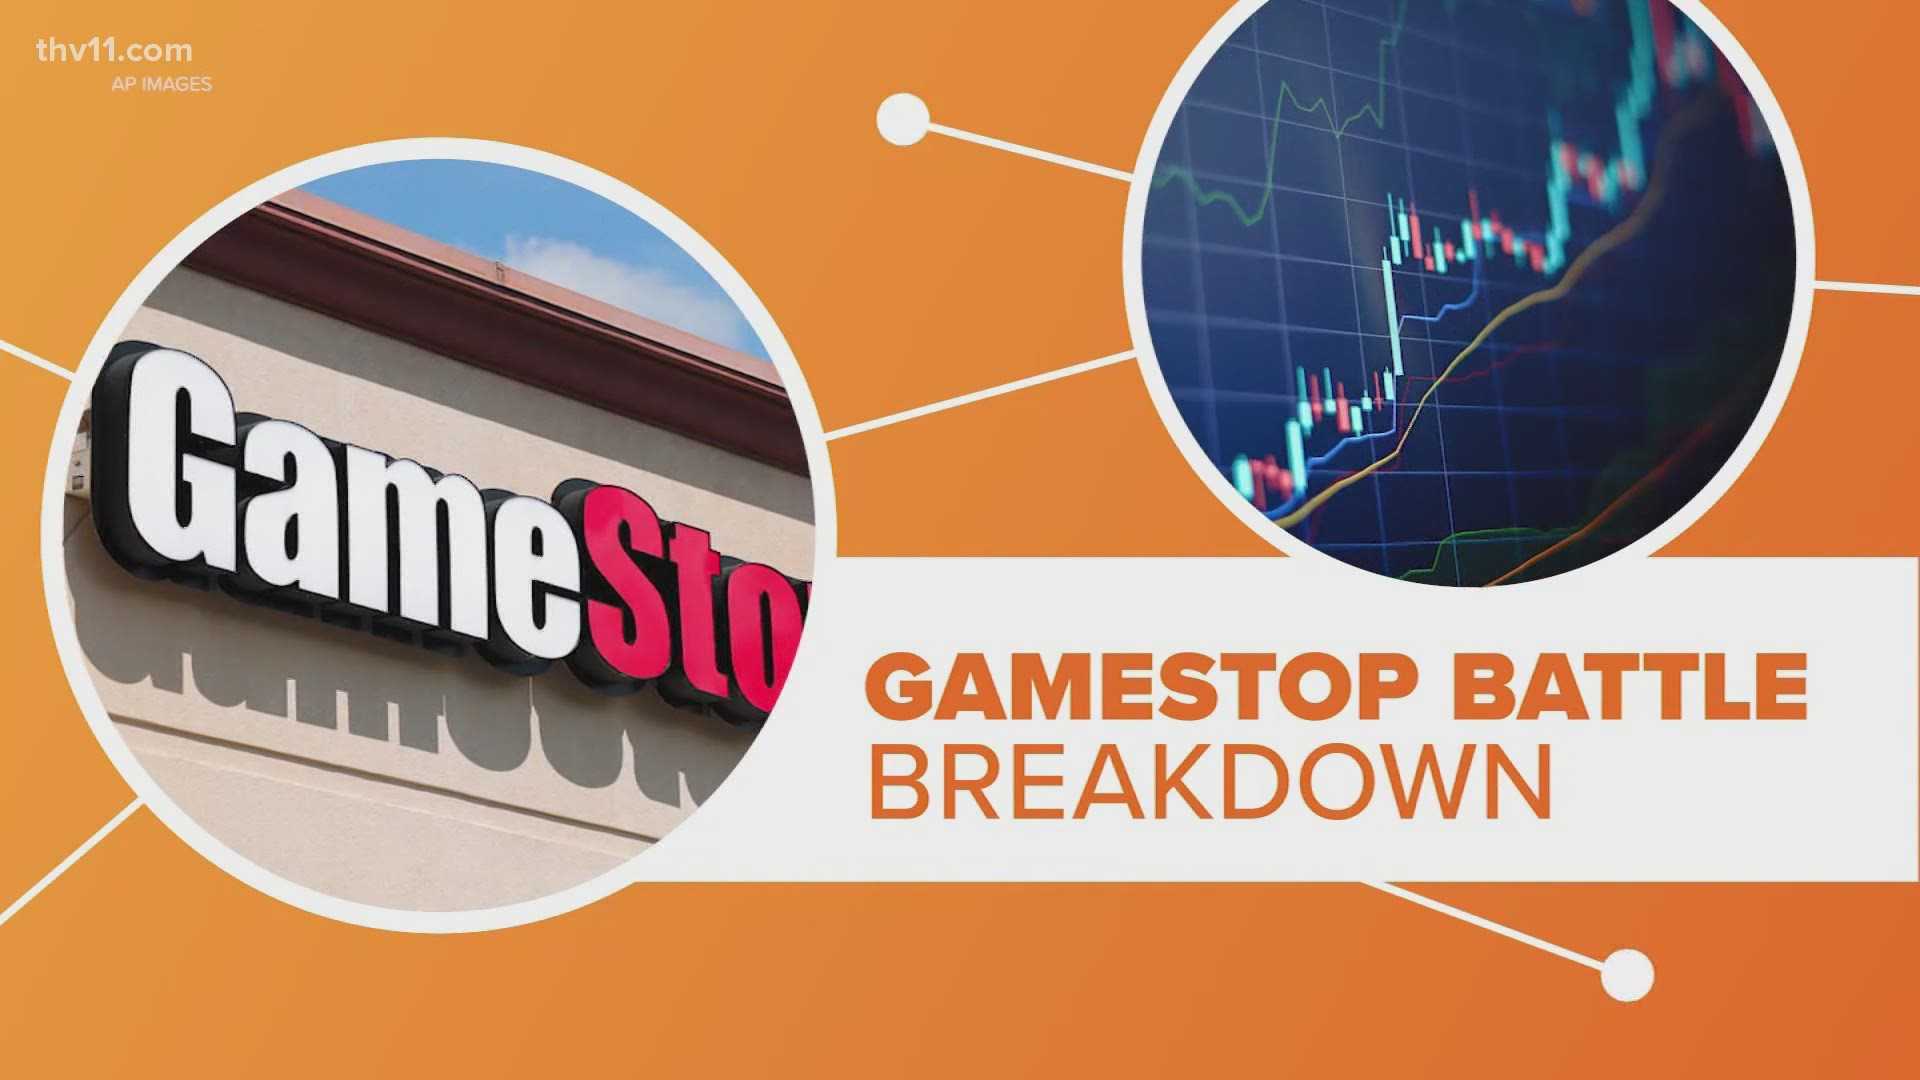 One of the big stories last week was that stock price drama with GameStop, and while it's leveled off, the scenario could happen again.